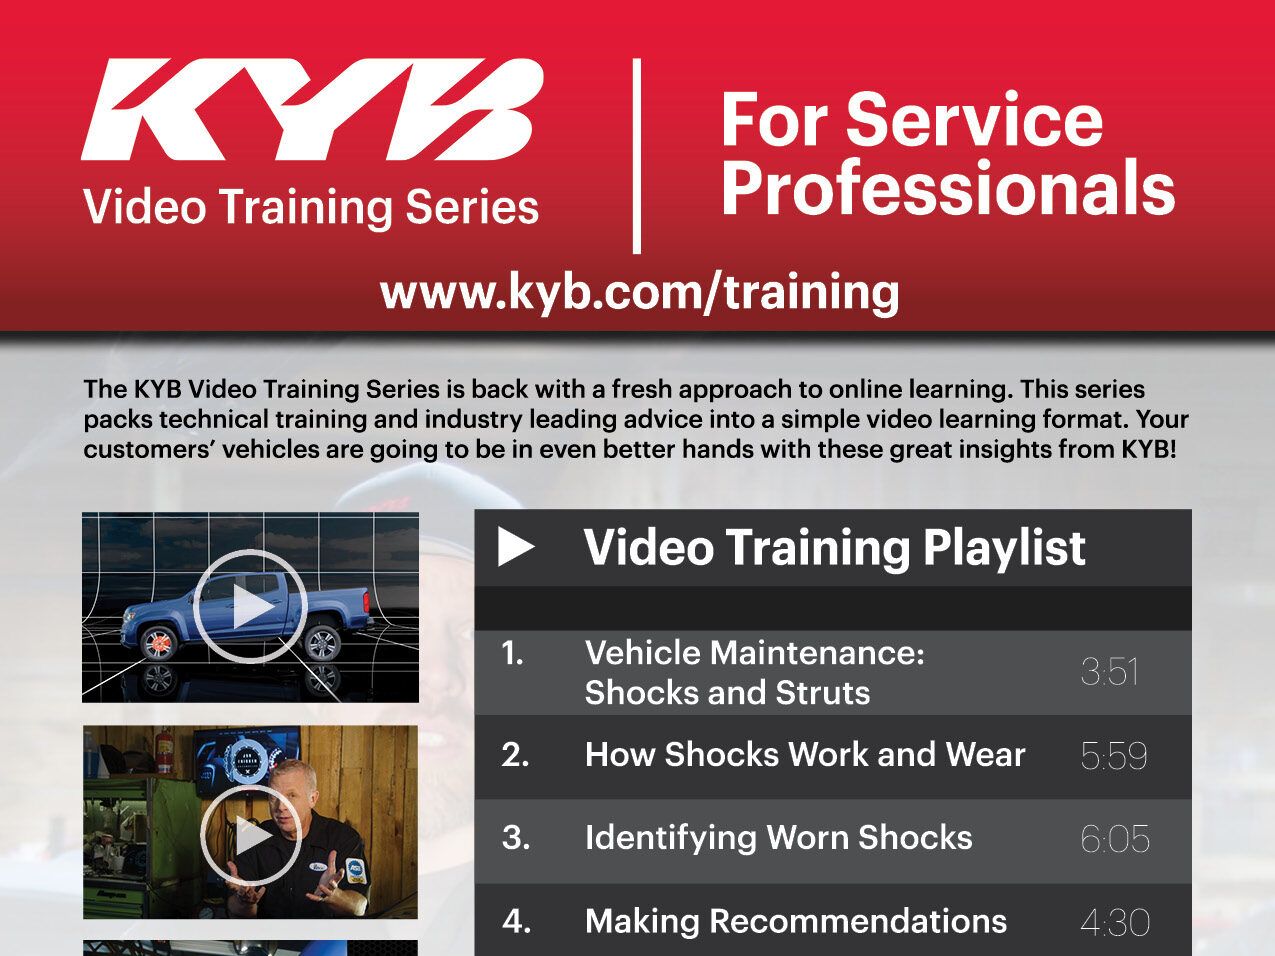 Continuing their efforts to provide world class training to service professionals, KYB has announced a newly updated Video Training Series. 